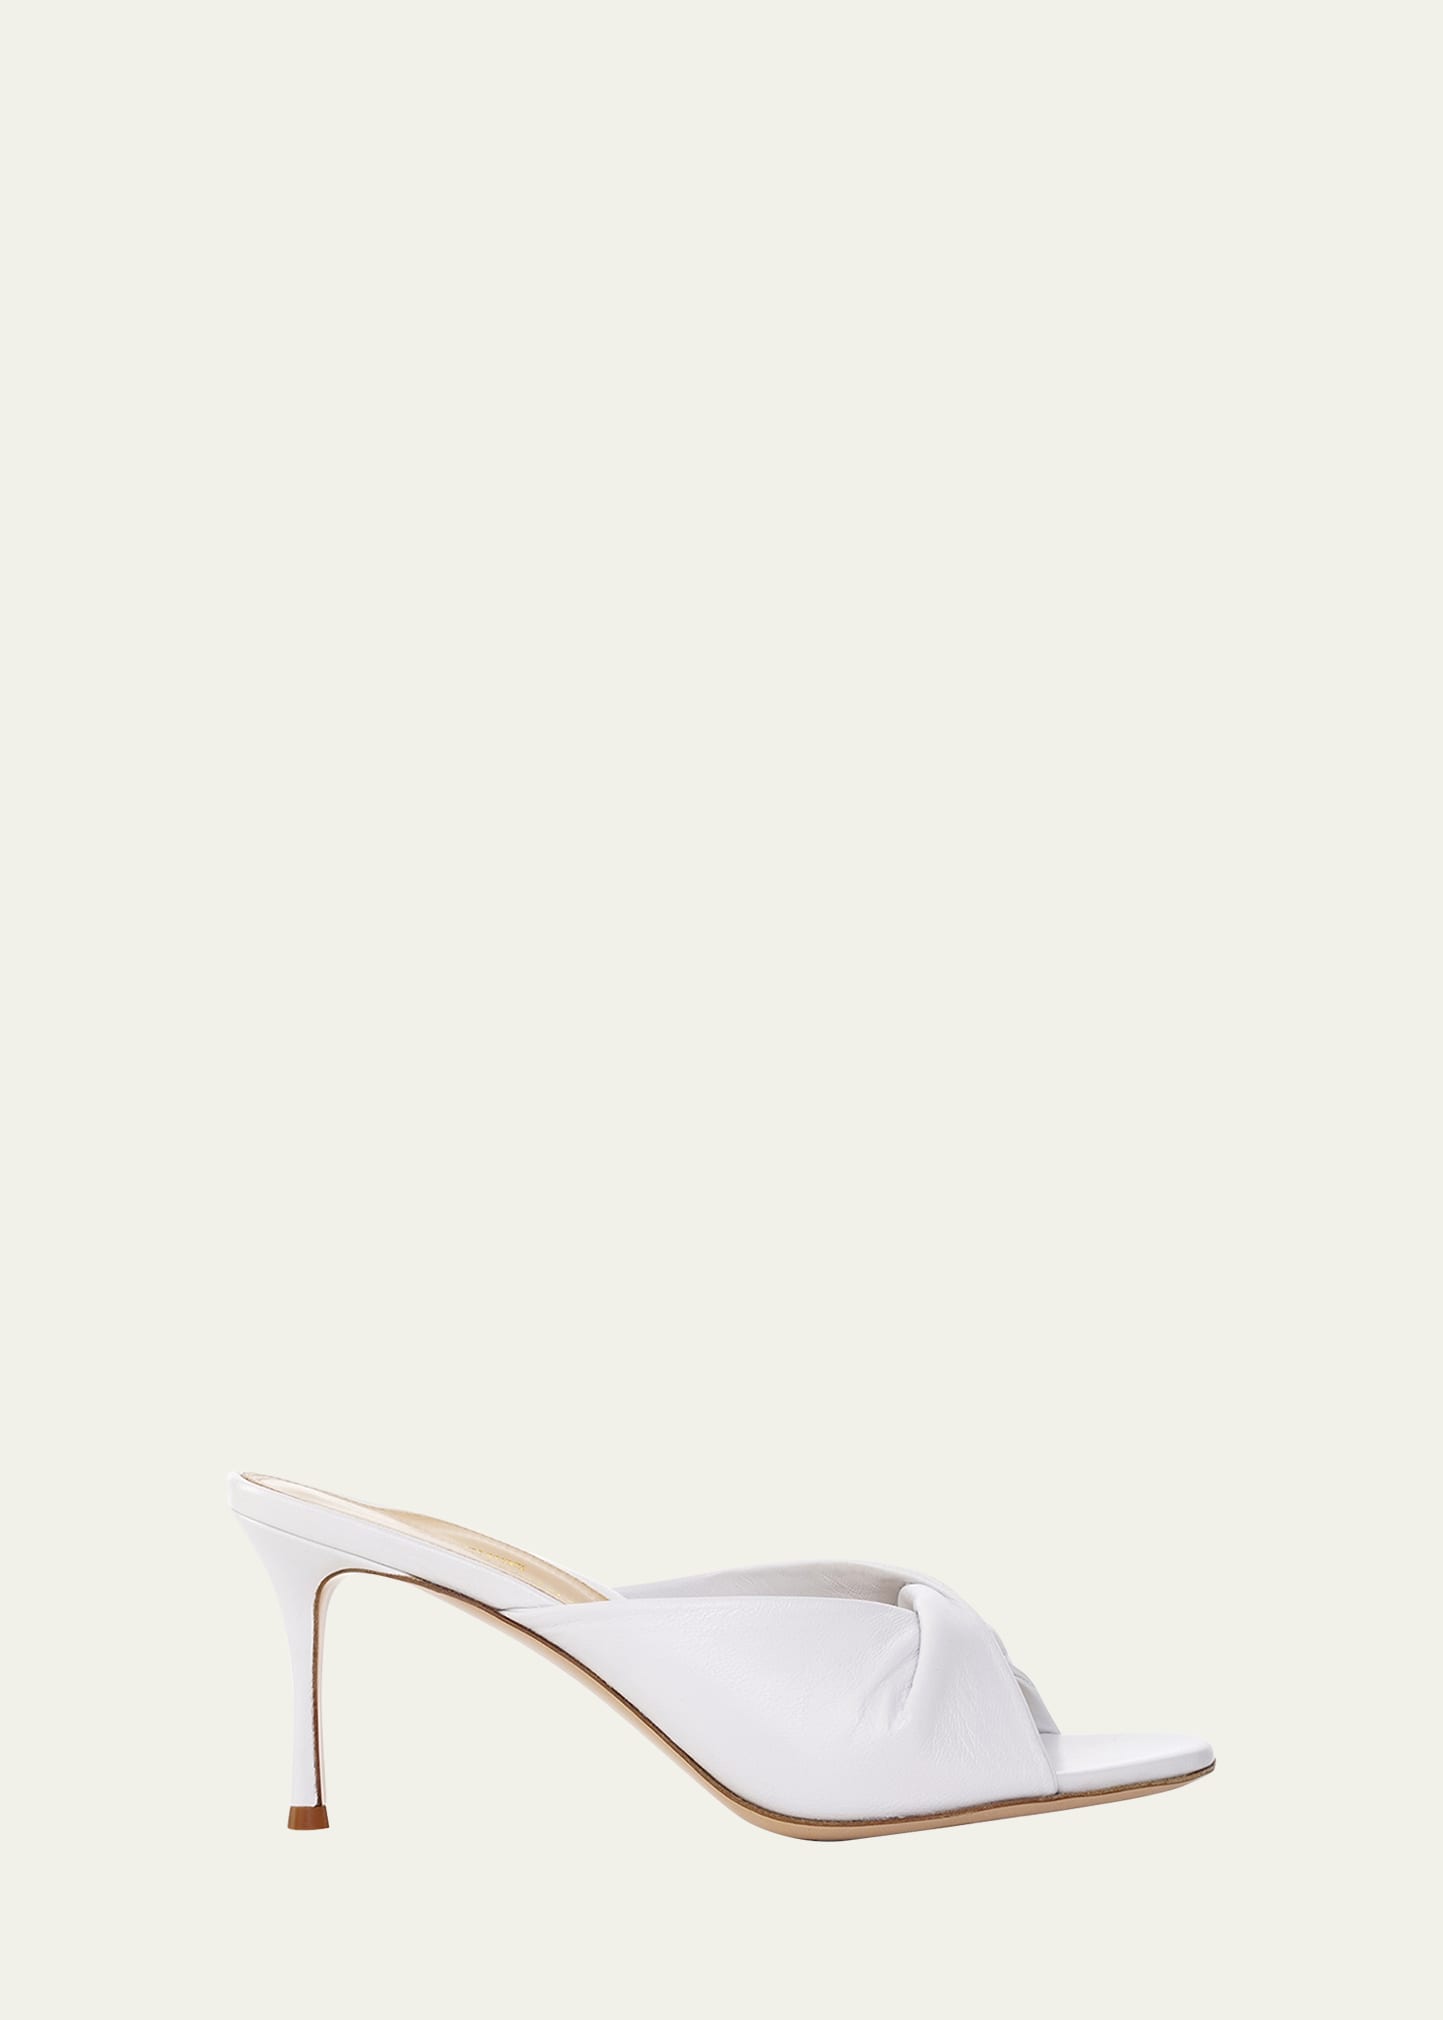 Marion Parke Carrie Twisted Napa Mule Sandals